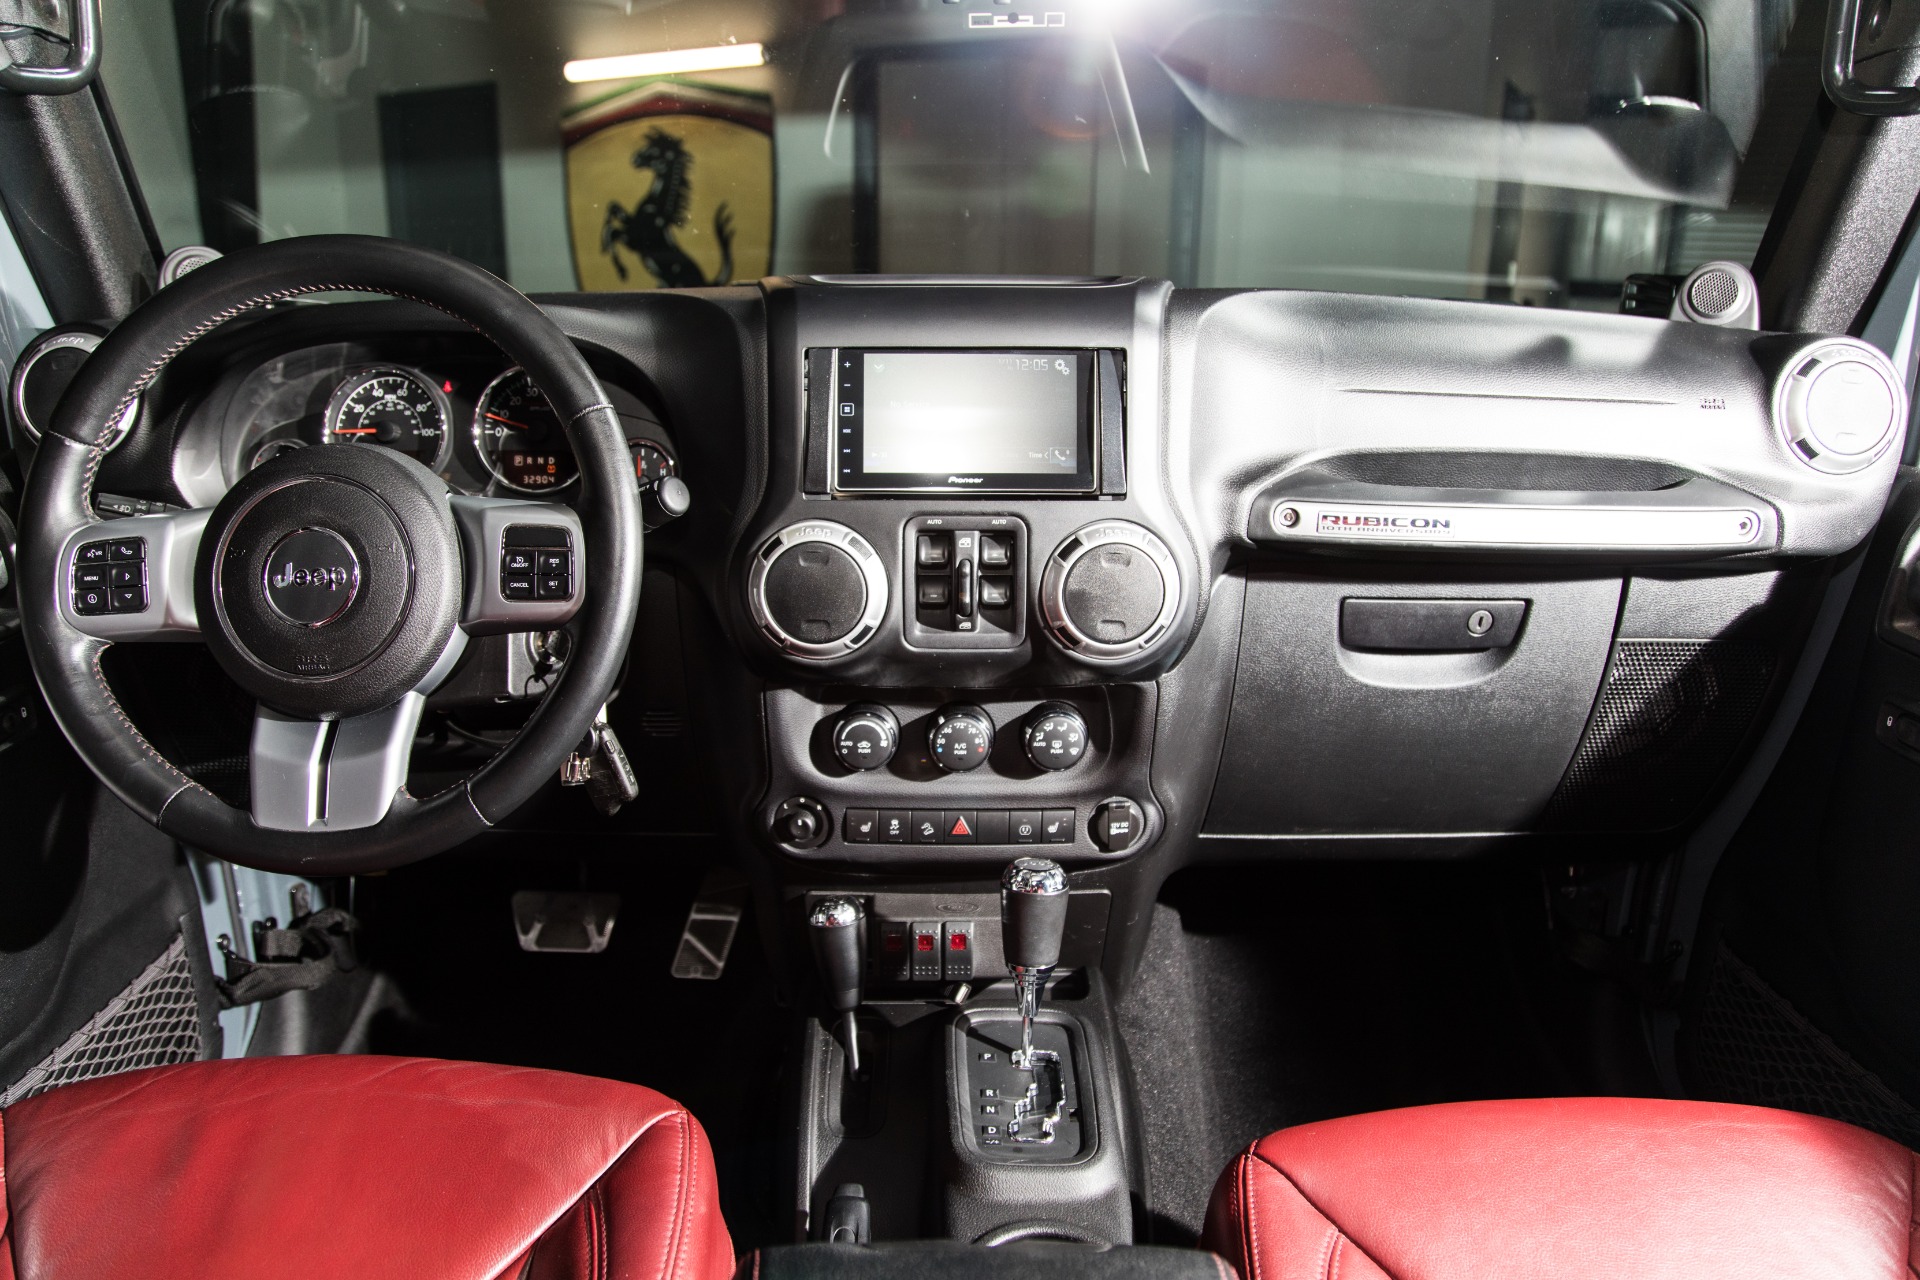 Used 2013 Jeep Wrangler Unlimited Rubicon 10th Anniversary